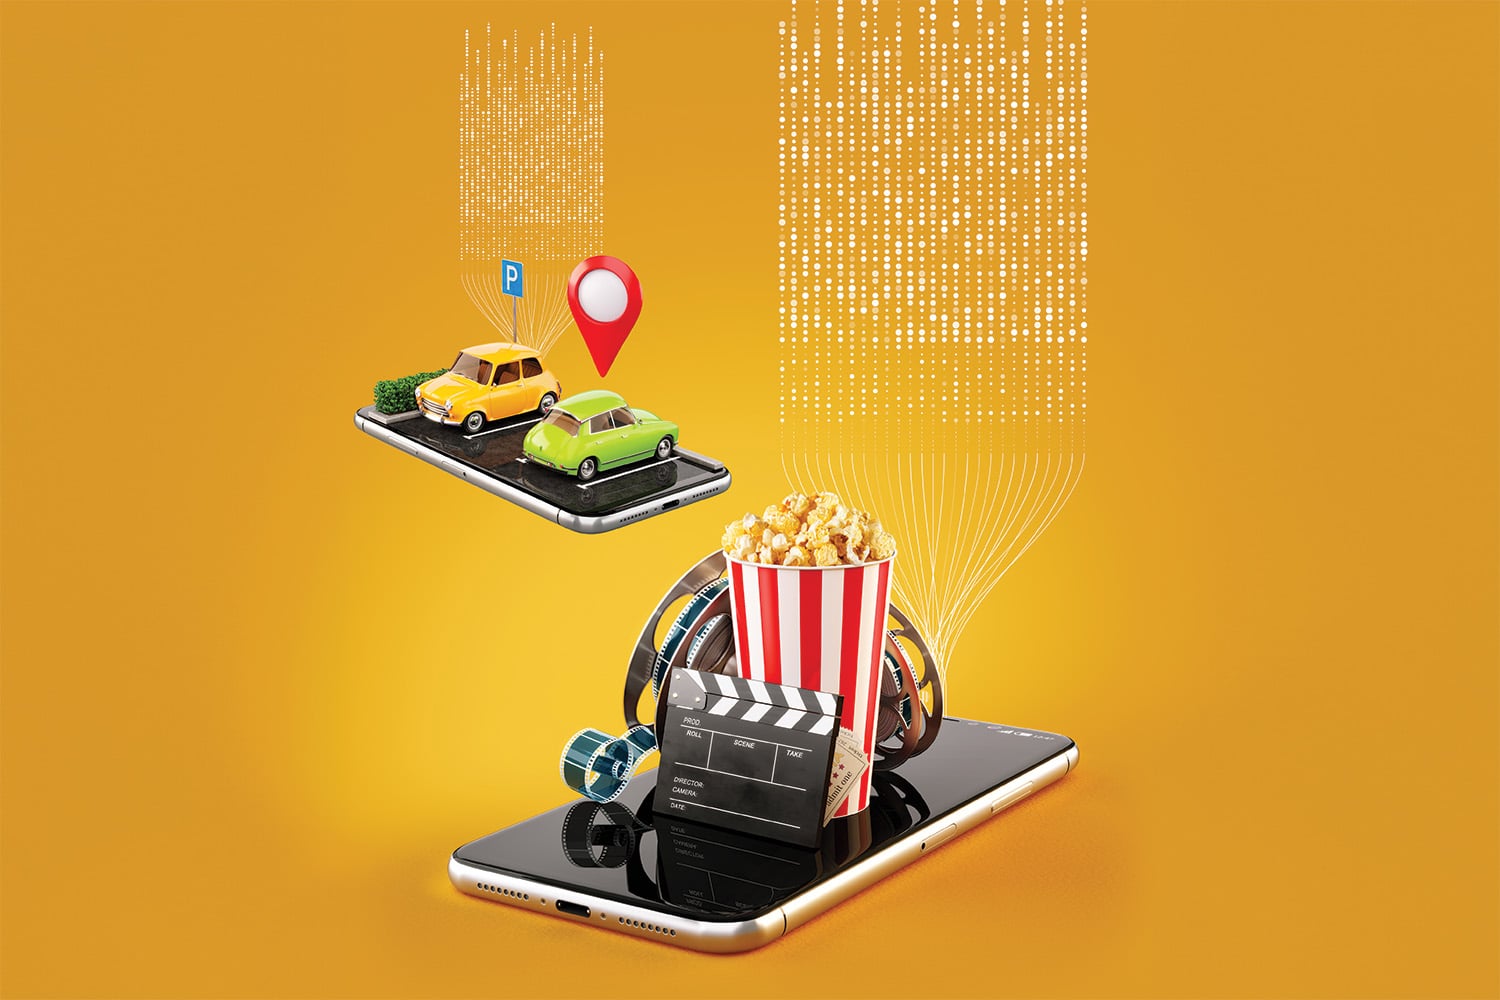 Illustration of cars parked on a mobile phone and what appears to be movie theater popcorn. Over a yellow background with abstract digital markings representing data.